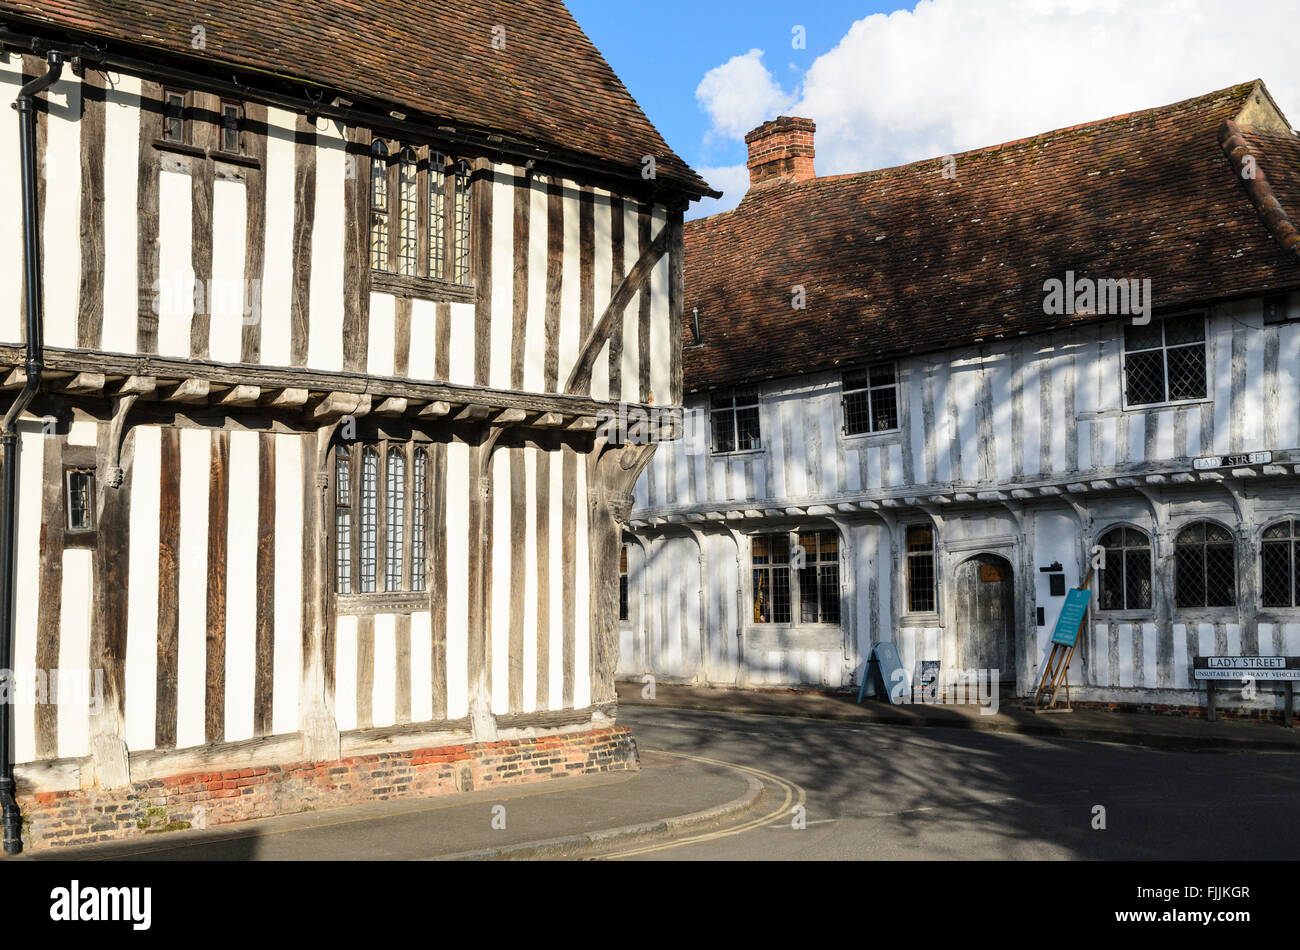 Traditional half-timbered medieval builidings in Lavenham, Suffolk, England, UK. Stock Photo